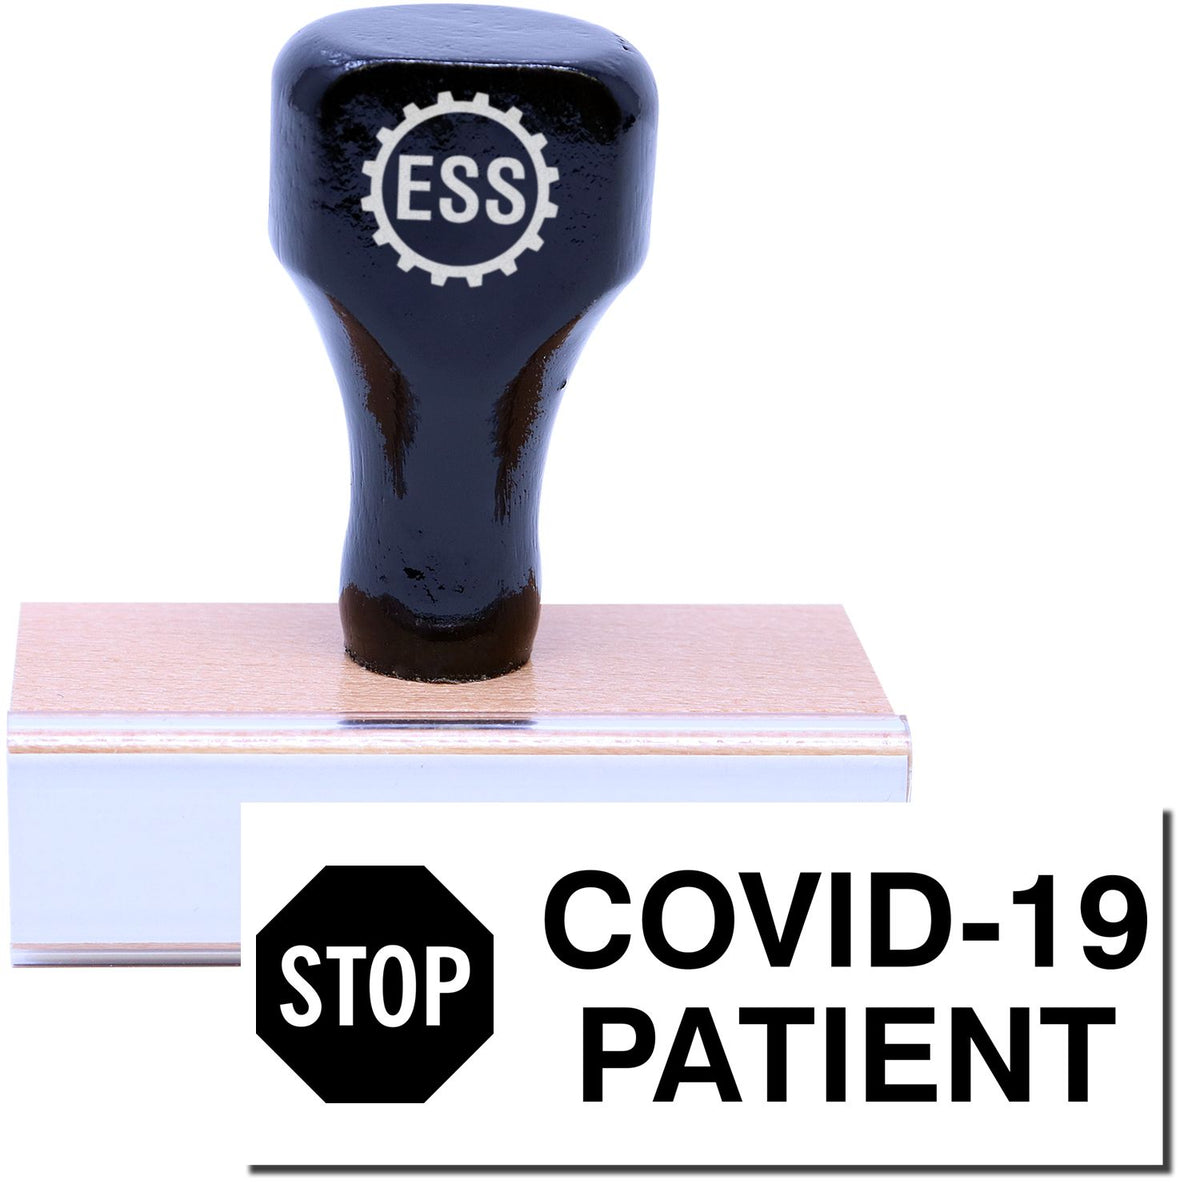 A stock office rubber stamp with a stamped image showing how the text &quot;COVID-19 PATIENT&quot; with a &quot;STOP&quot; signboard is displayed after stamping.